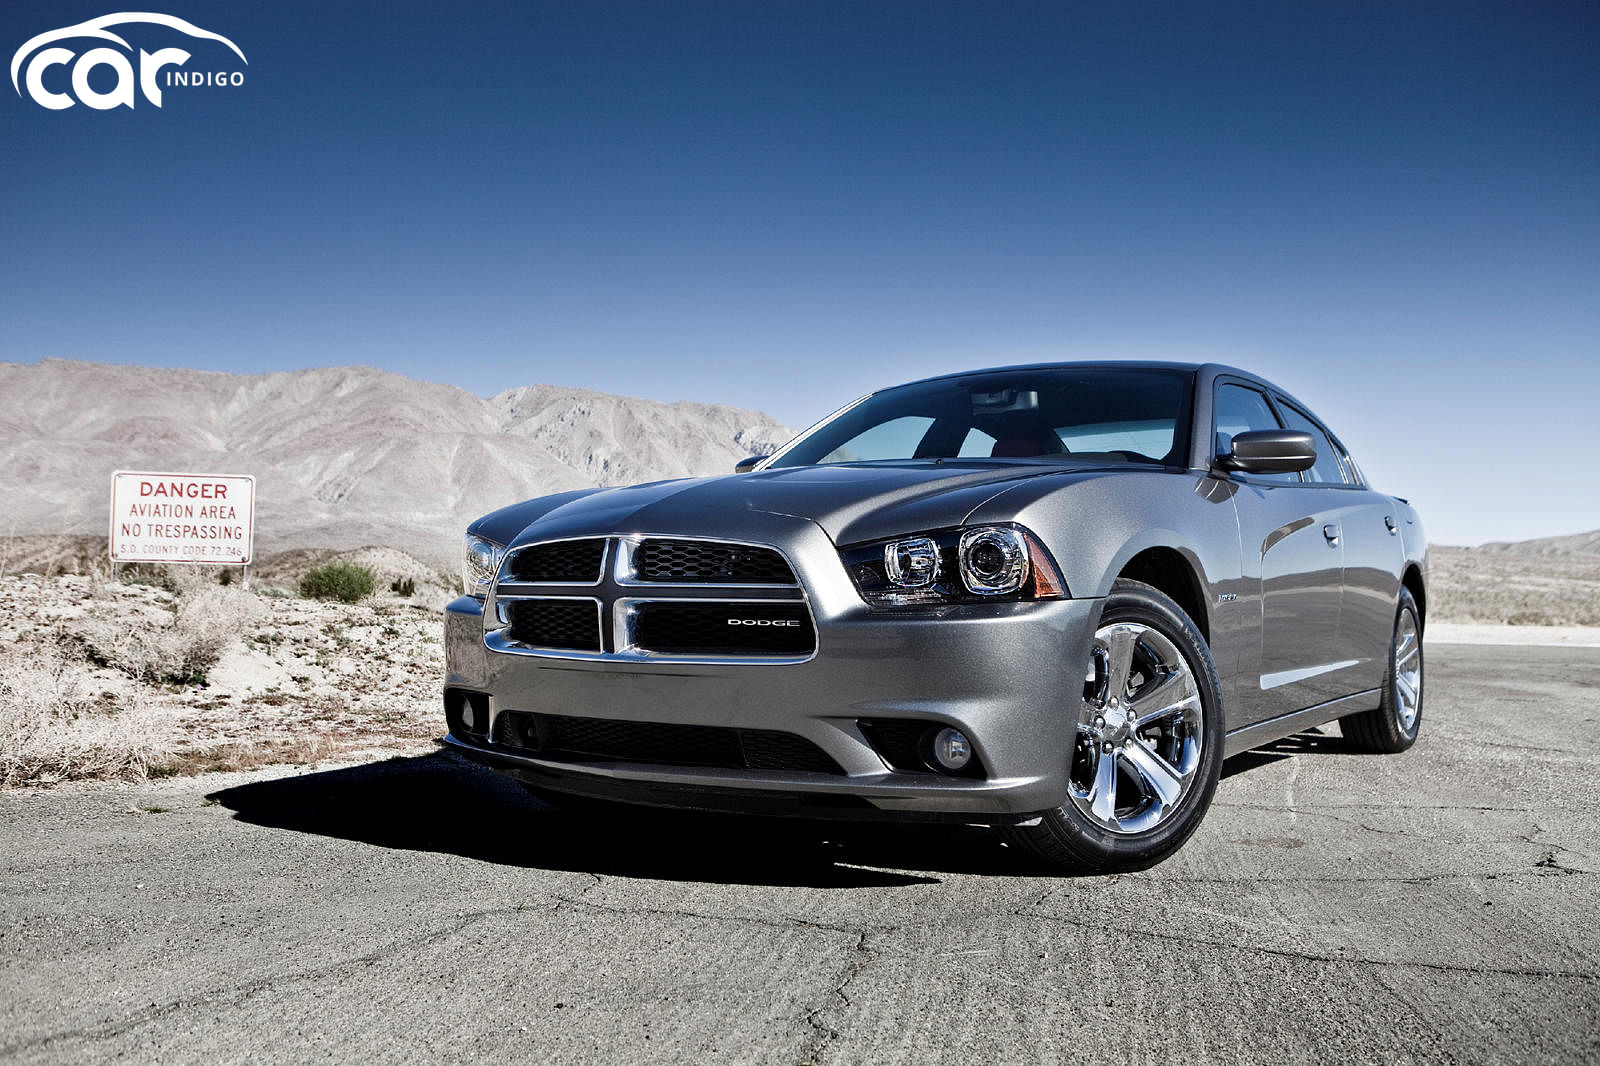 2013 Dodge Charger Price, Review, Ratings and Pictures